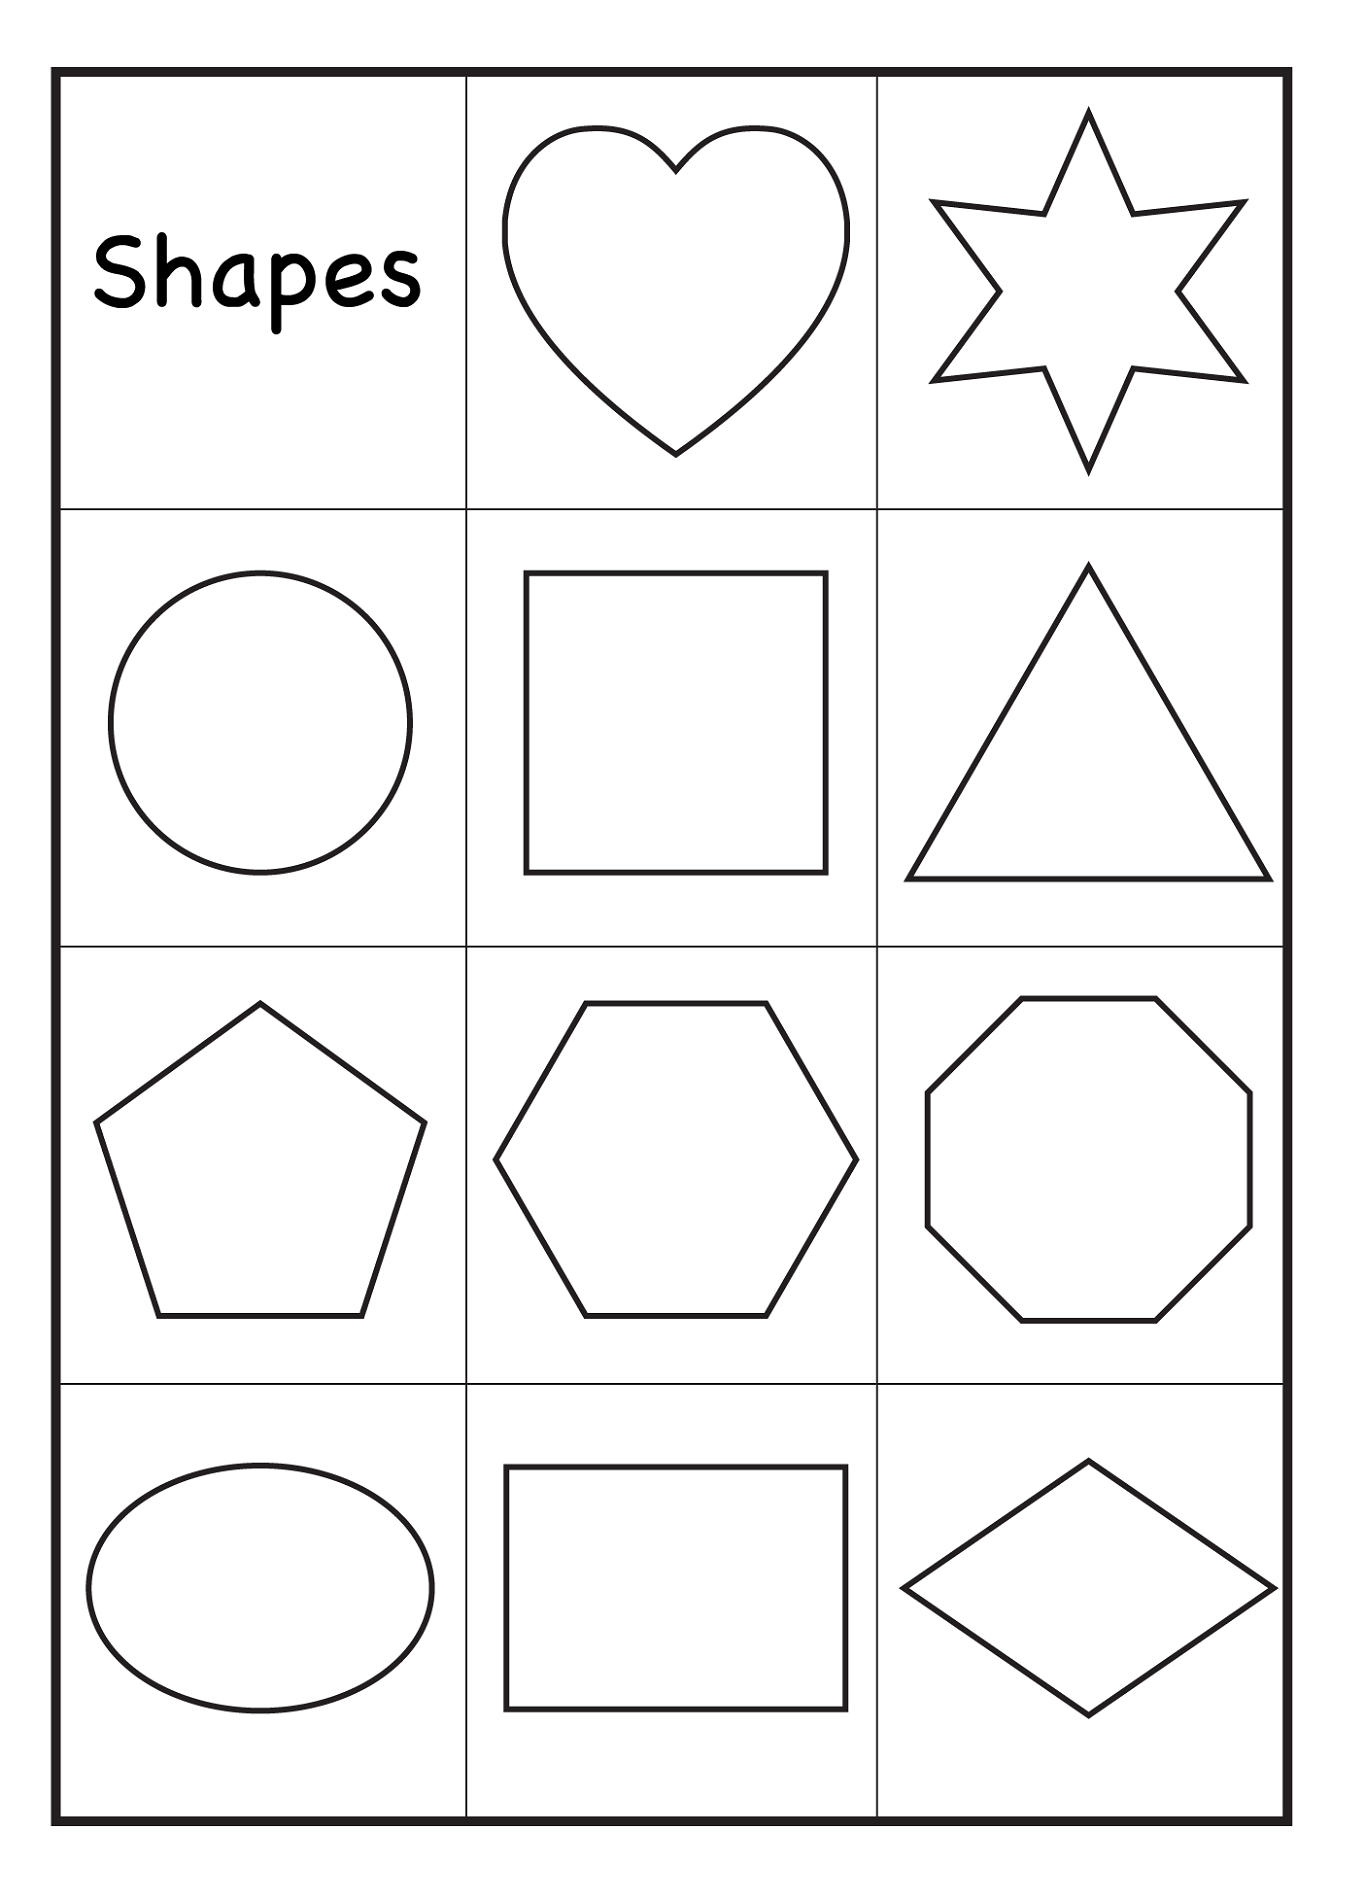 color-by-shape-worksheet-printable-001-coloring-sheets-oval-shape-maze-printable-worksheet